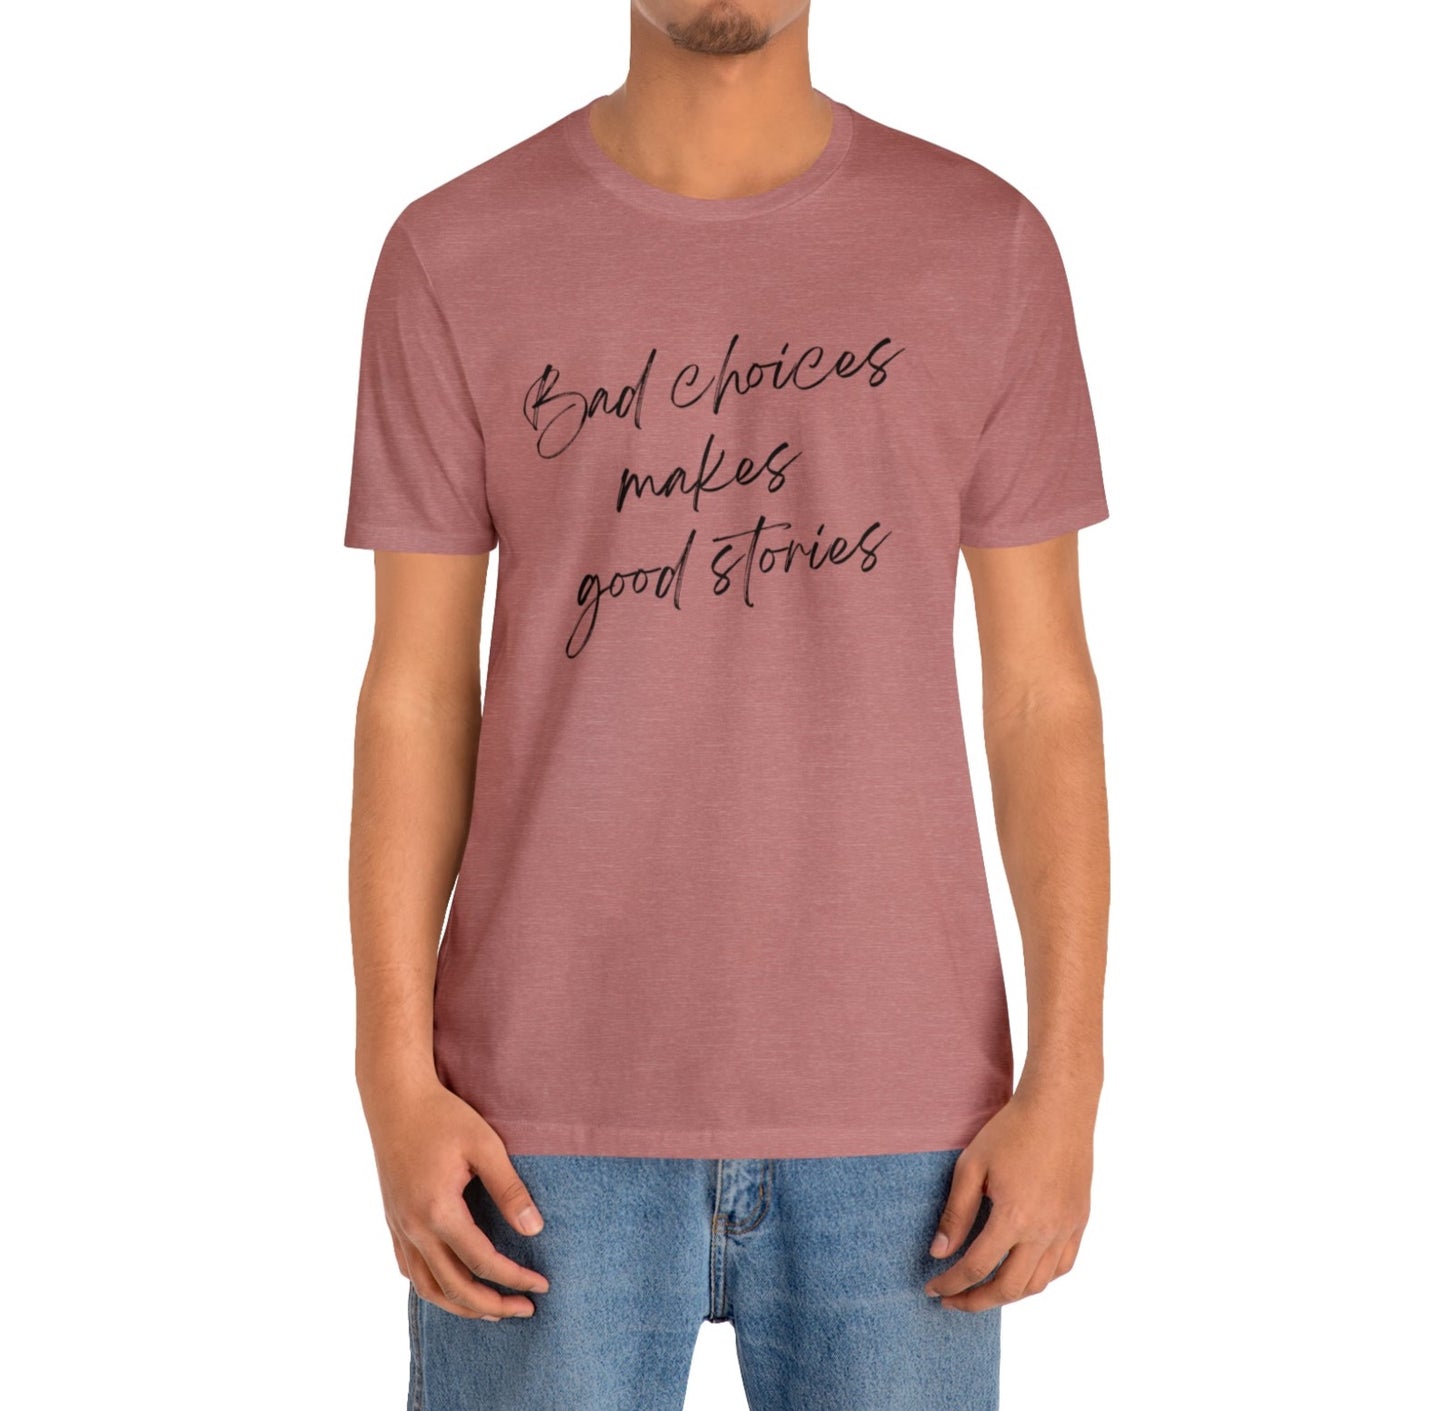 Bad choices makes good stories Jersey Short Sleeve T-shirt